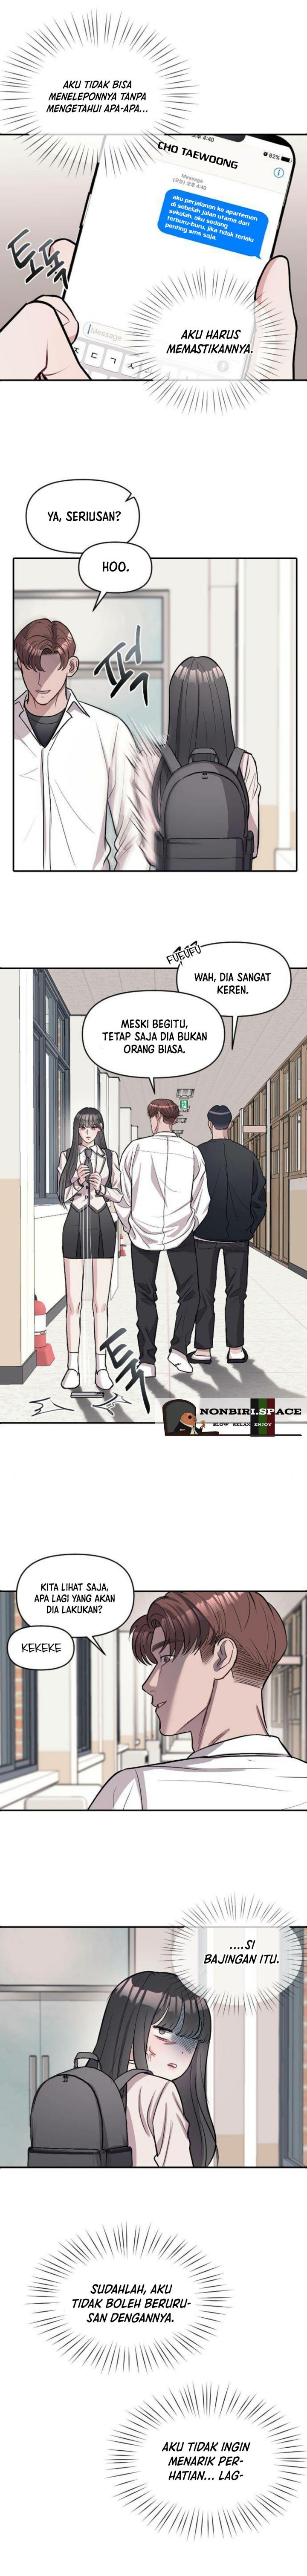 Undercover! Chaebol High School Chapter 09 - 105